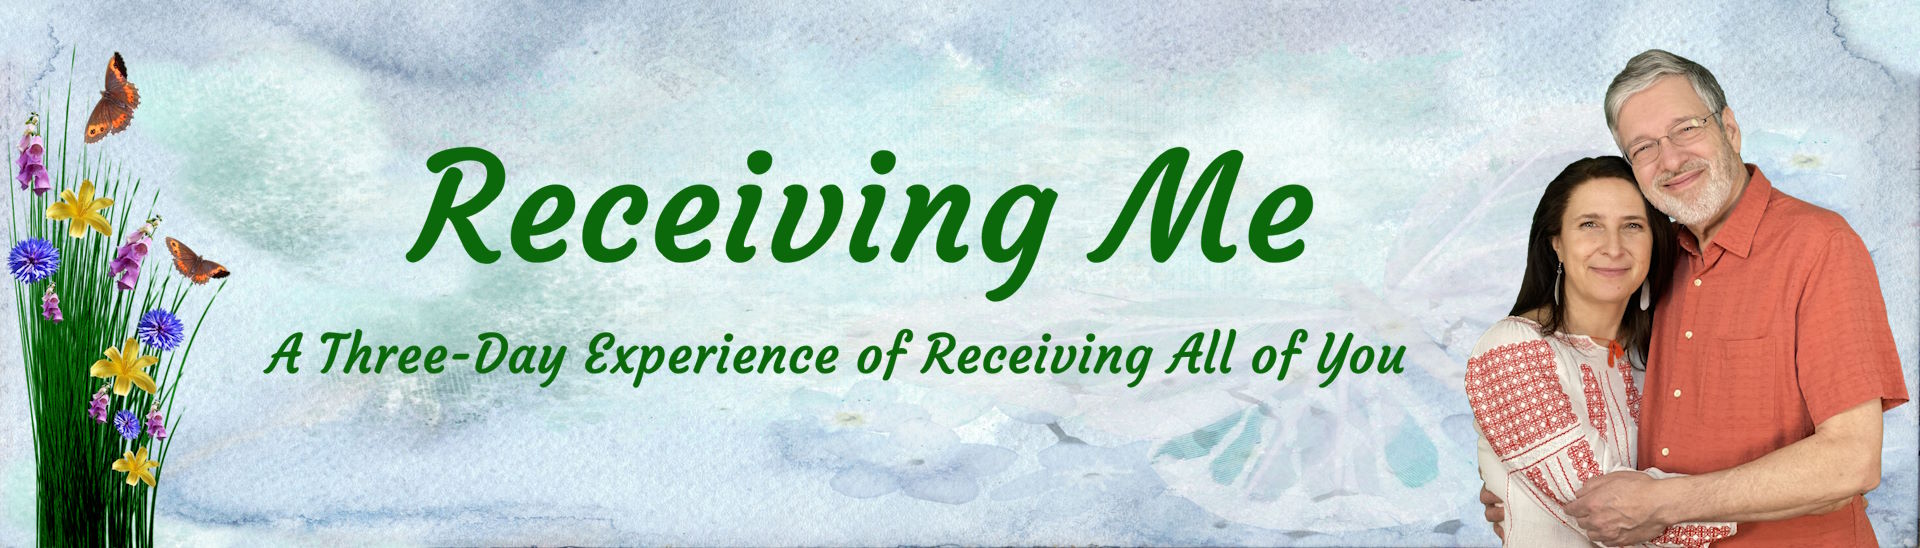 Event: Receiving Me: A Three-Day Experience of Receiving All of You